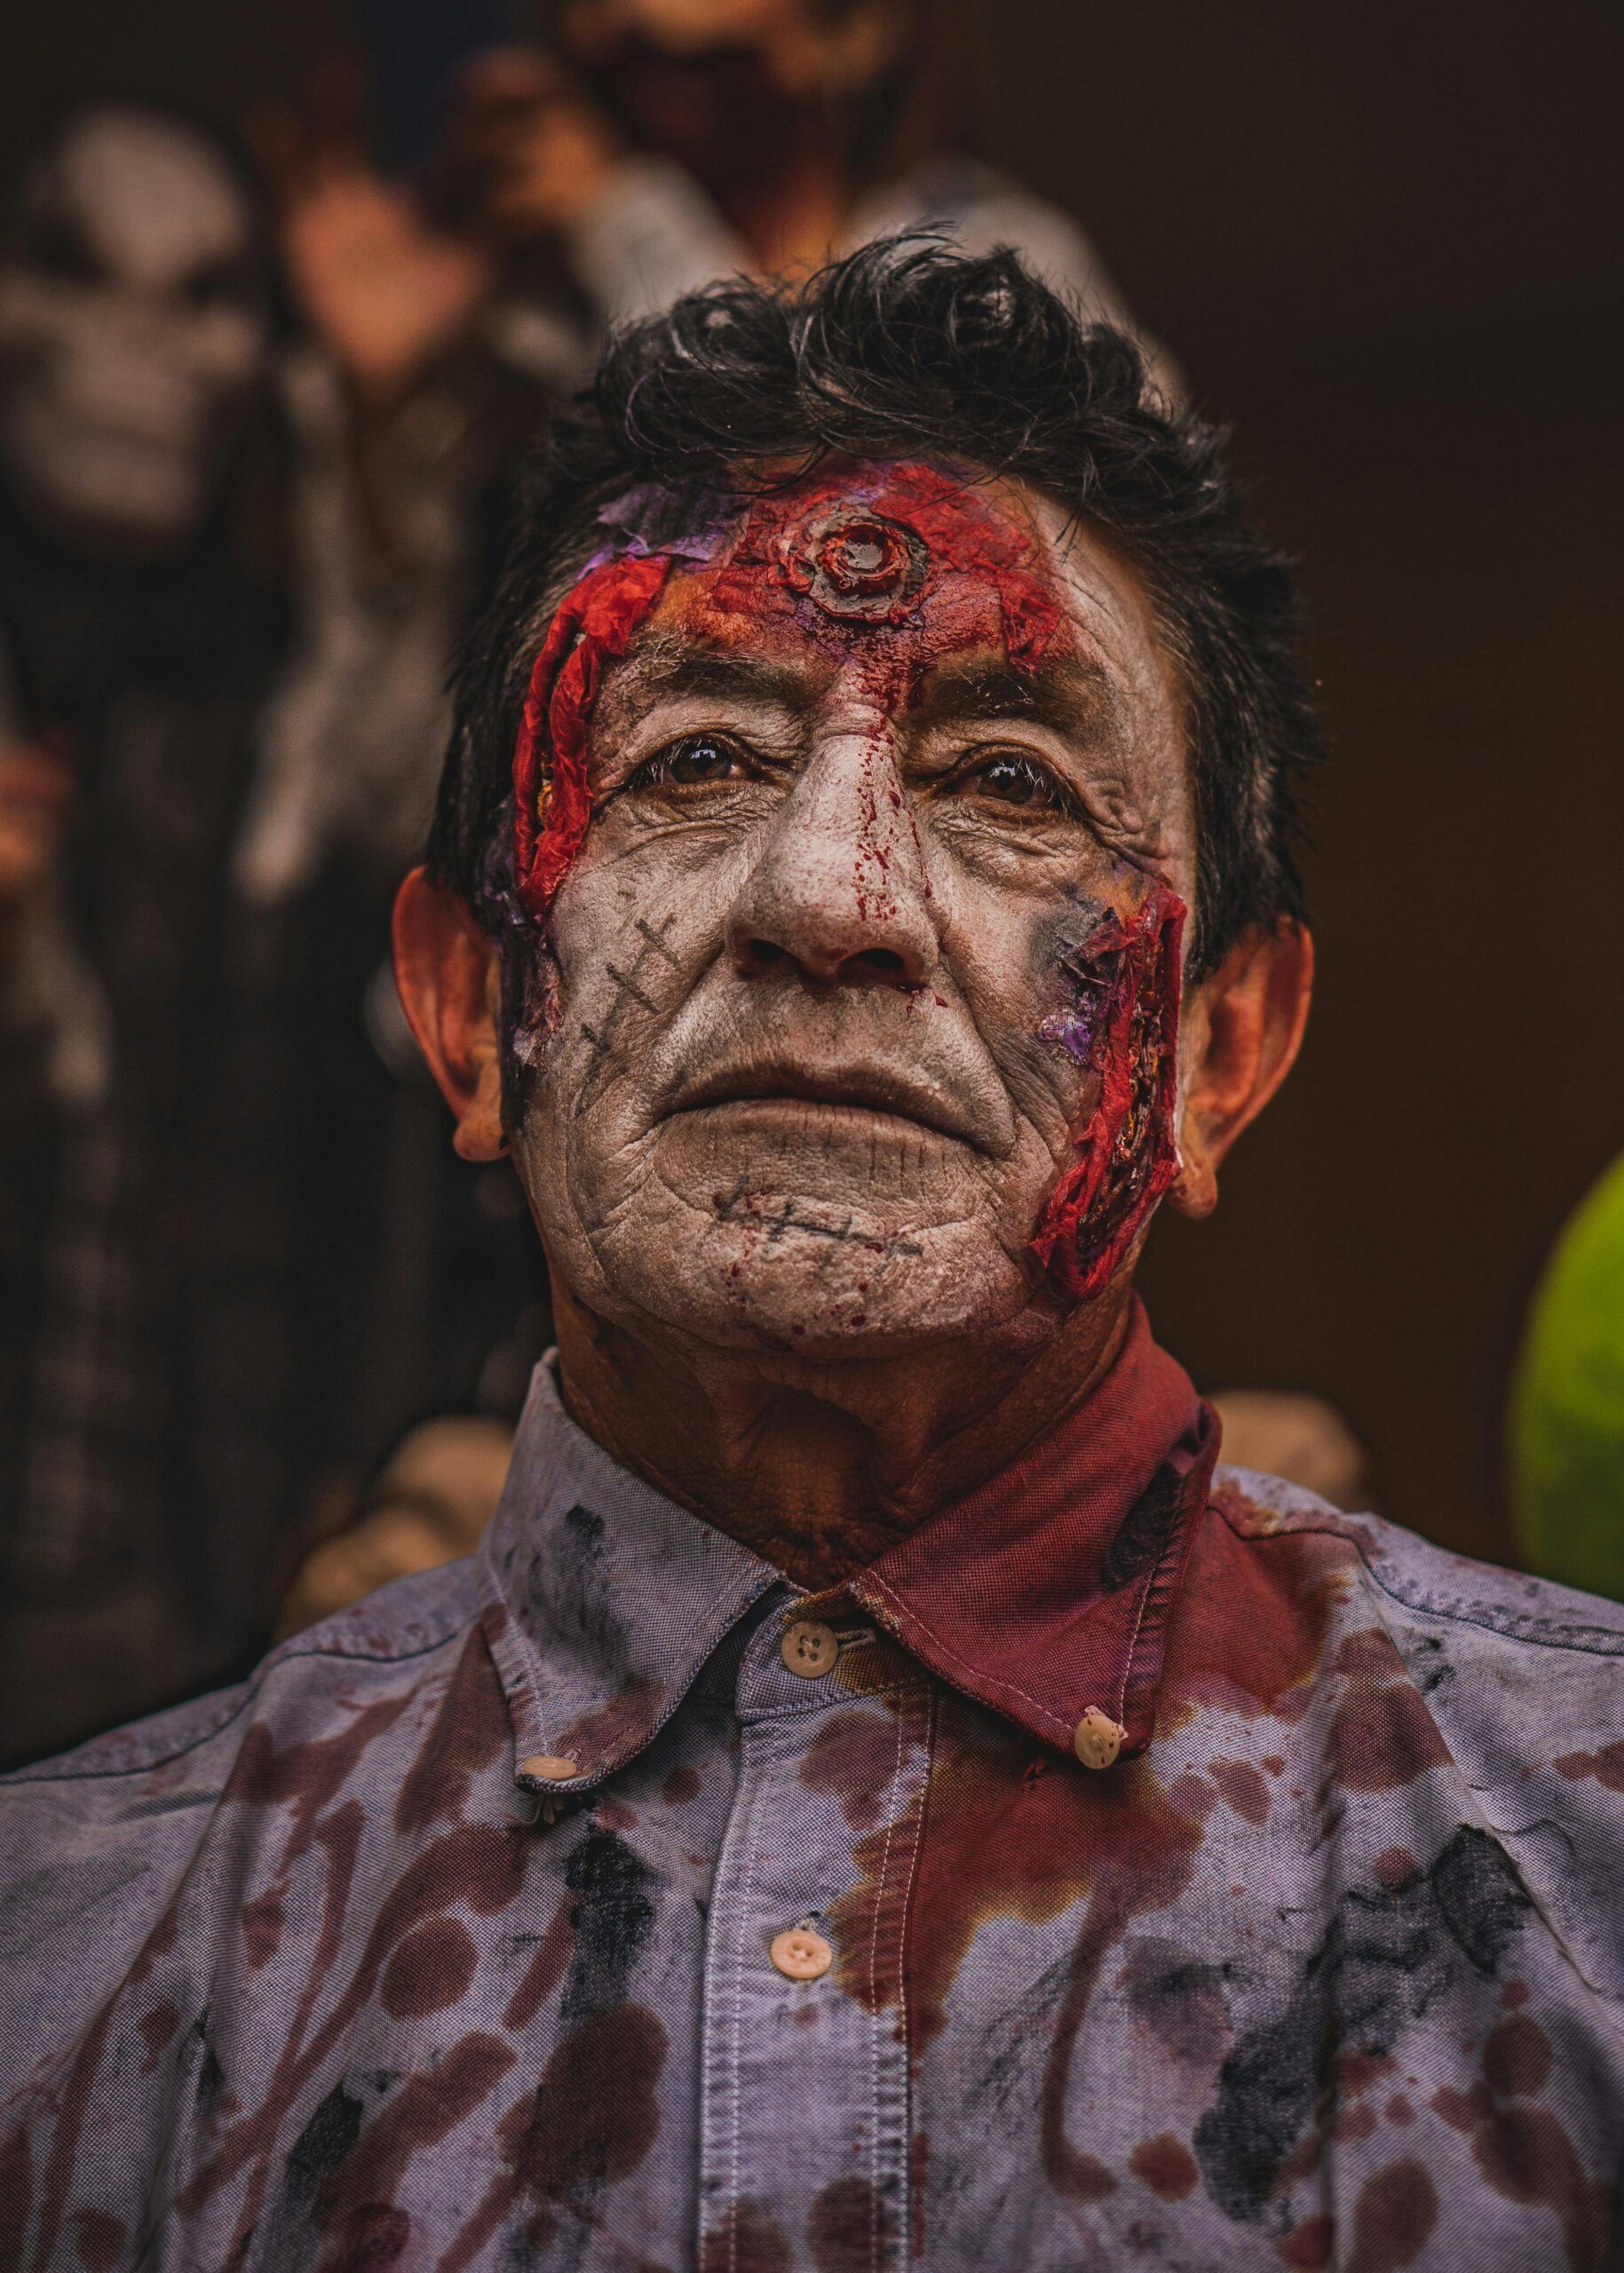 Photo by Ronaldo Murcia: https://www.pexels.com/photo/a-man-with-blood-on-his-face-14427951/